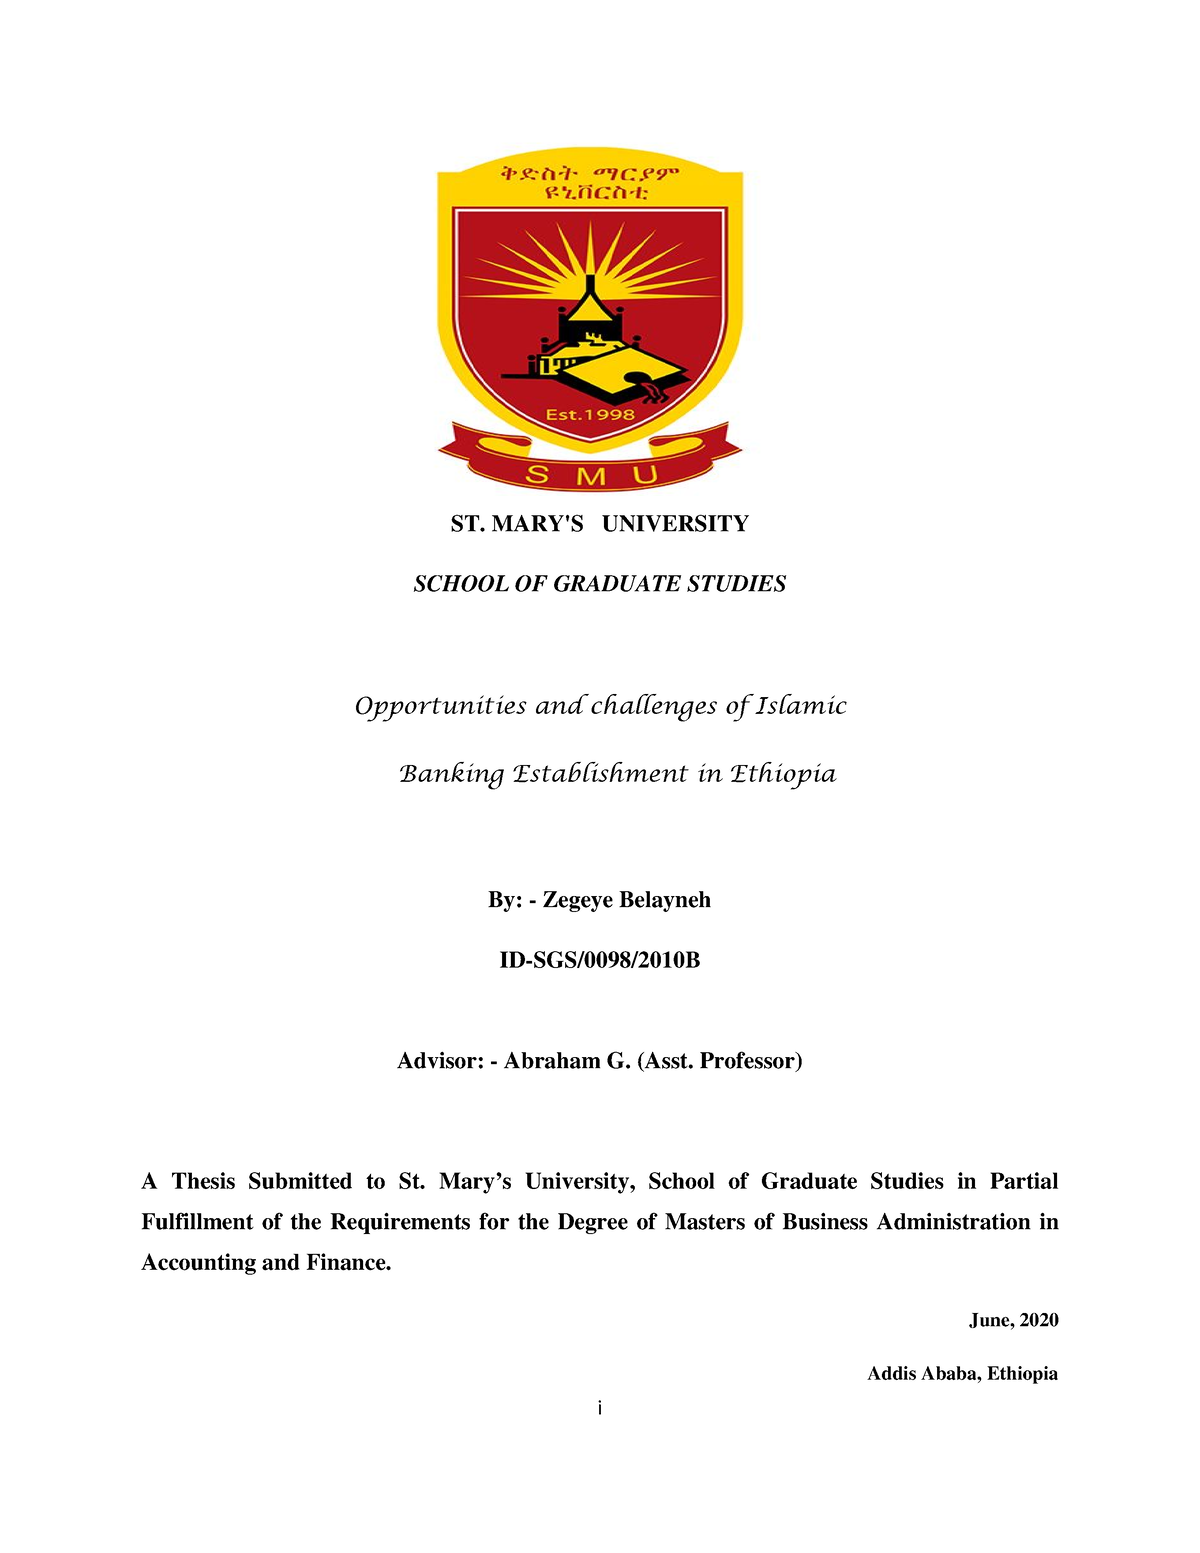 st mary's university research paper pdf download